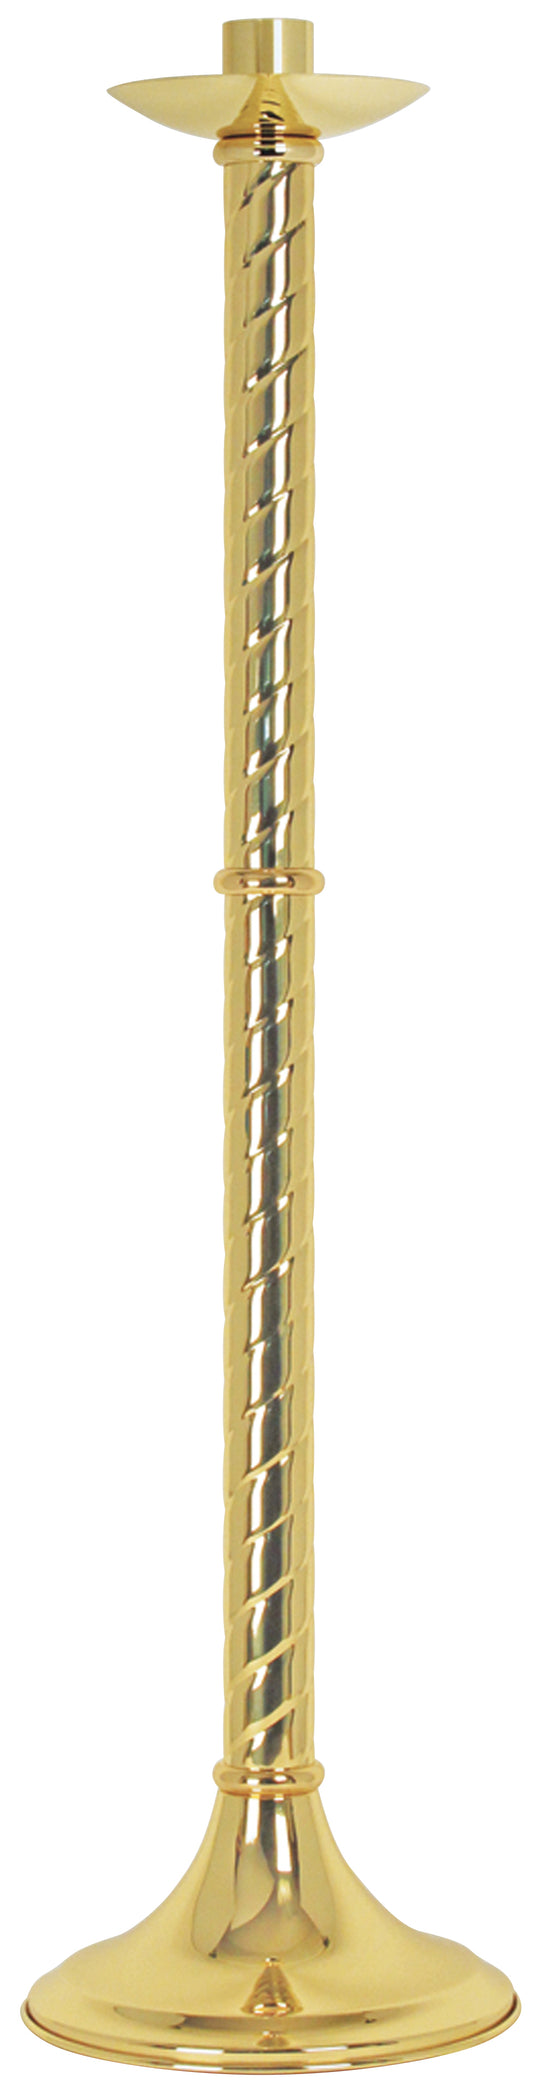 Paschal Candle Holder - K1135